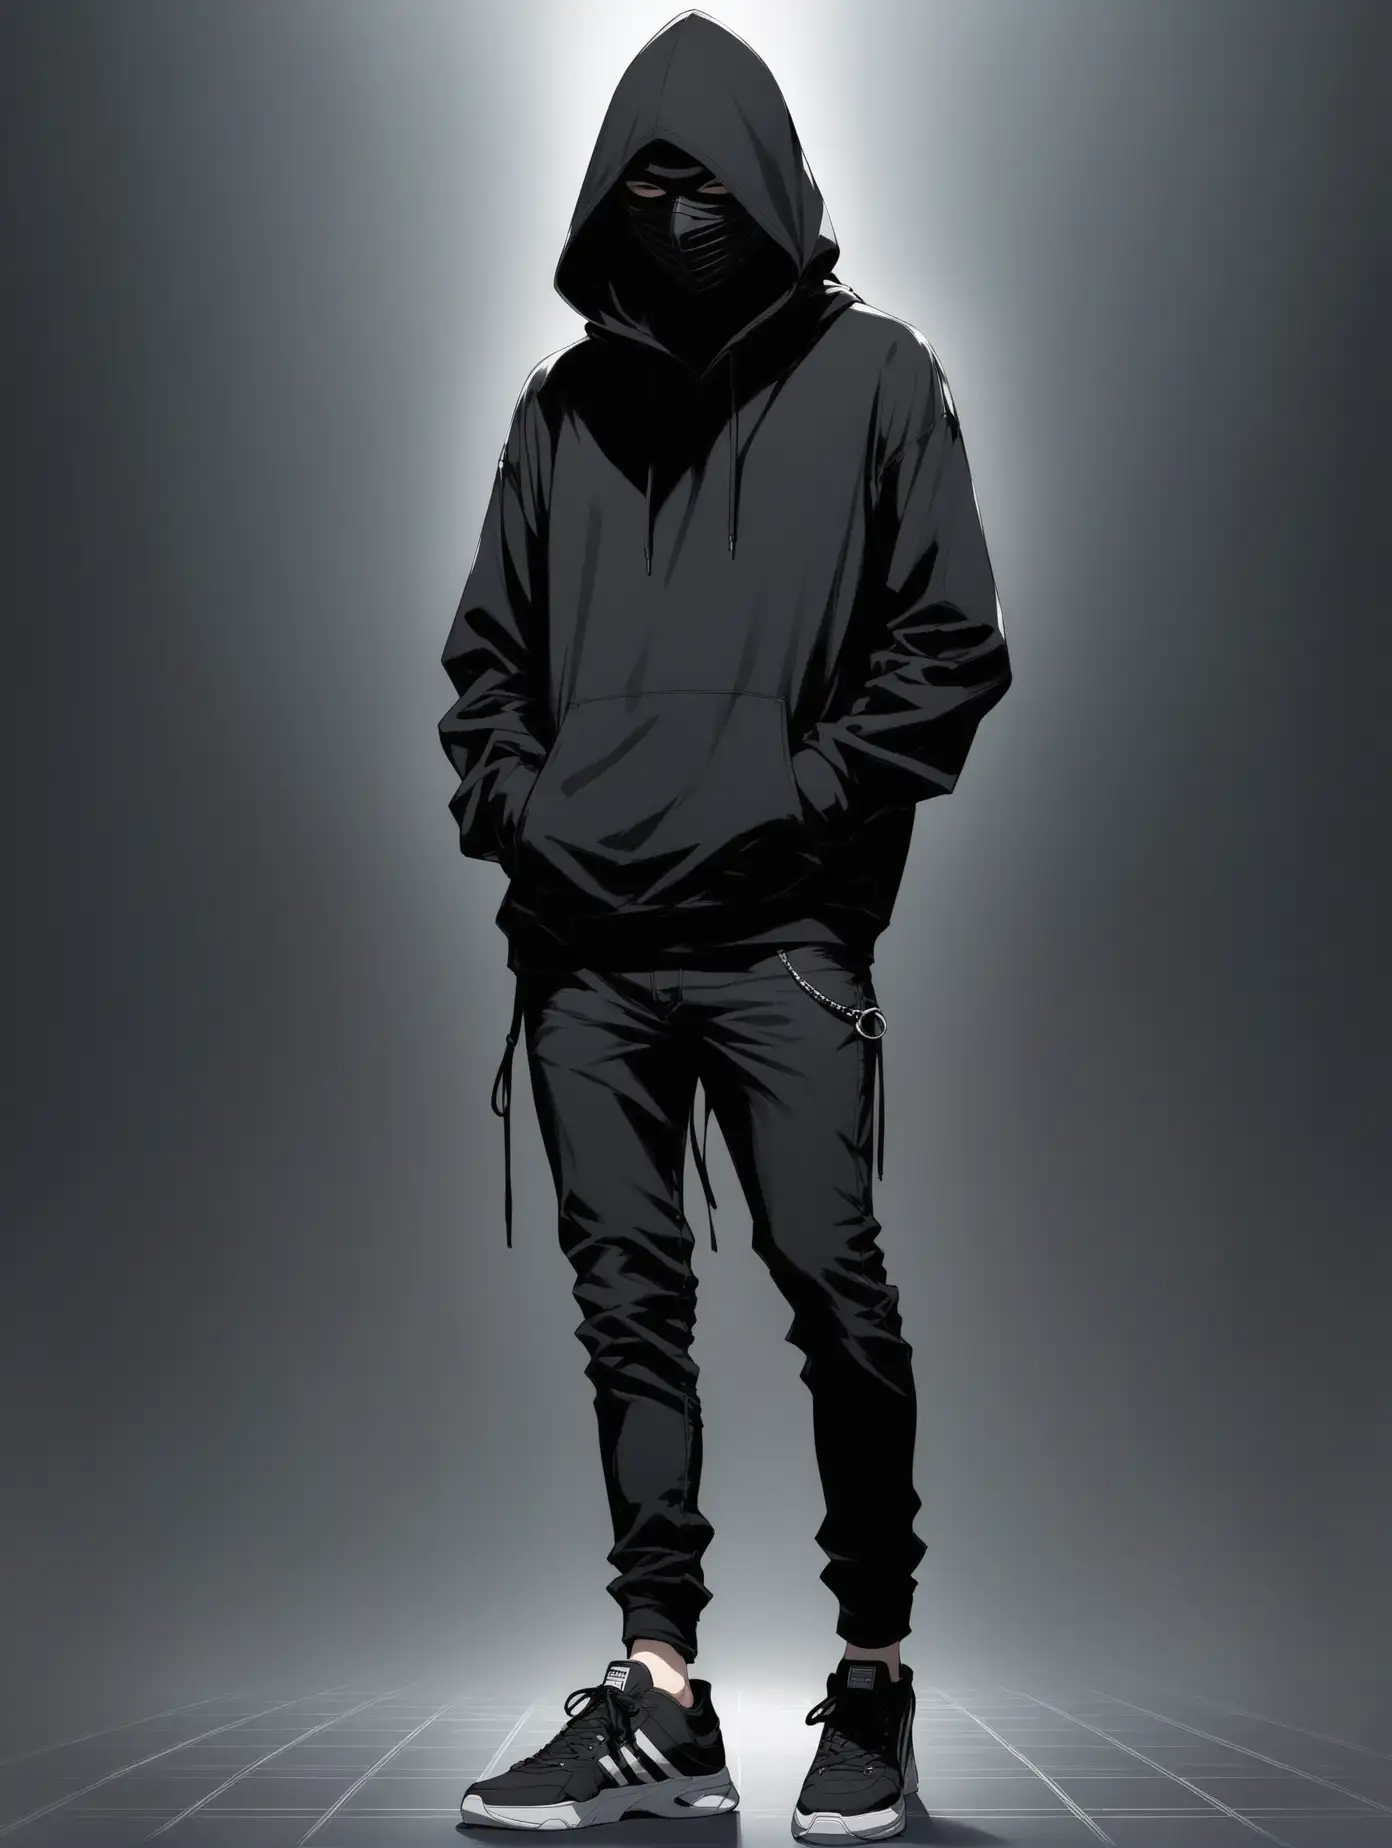 Enigmatic-Figure-in-Black-Hoodie-and-Mask